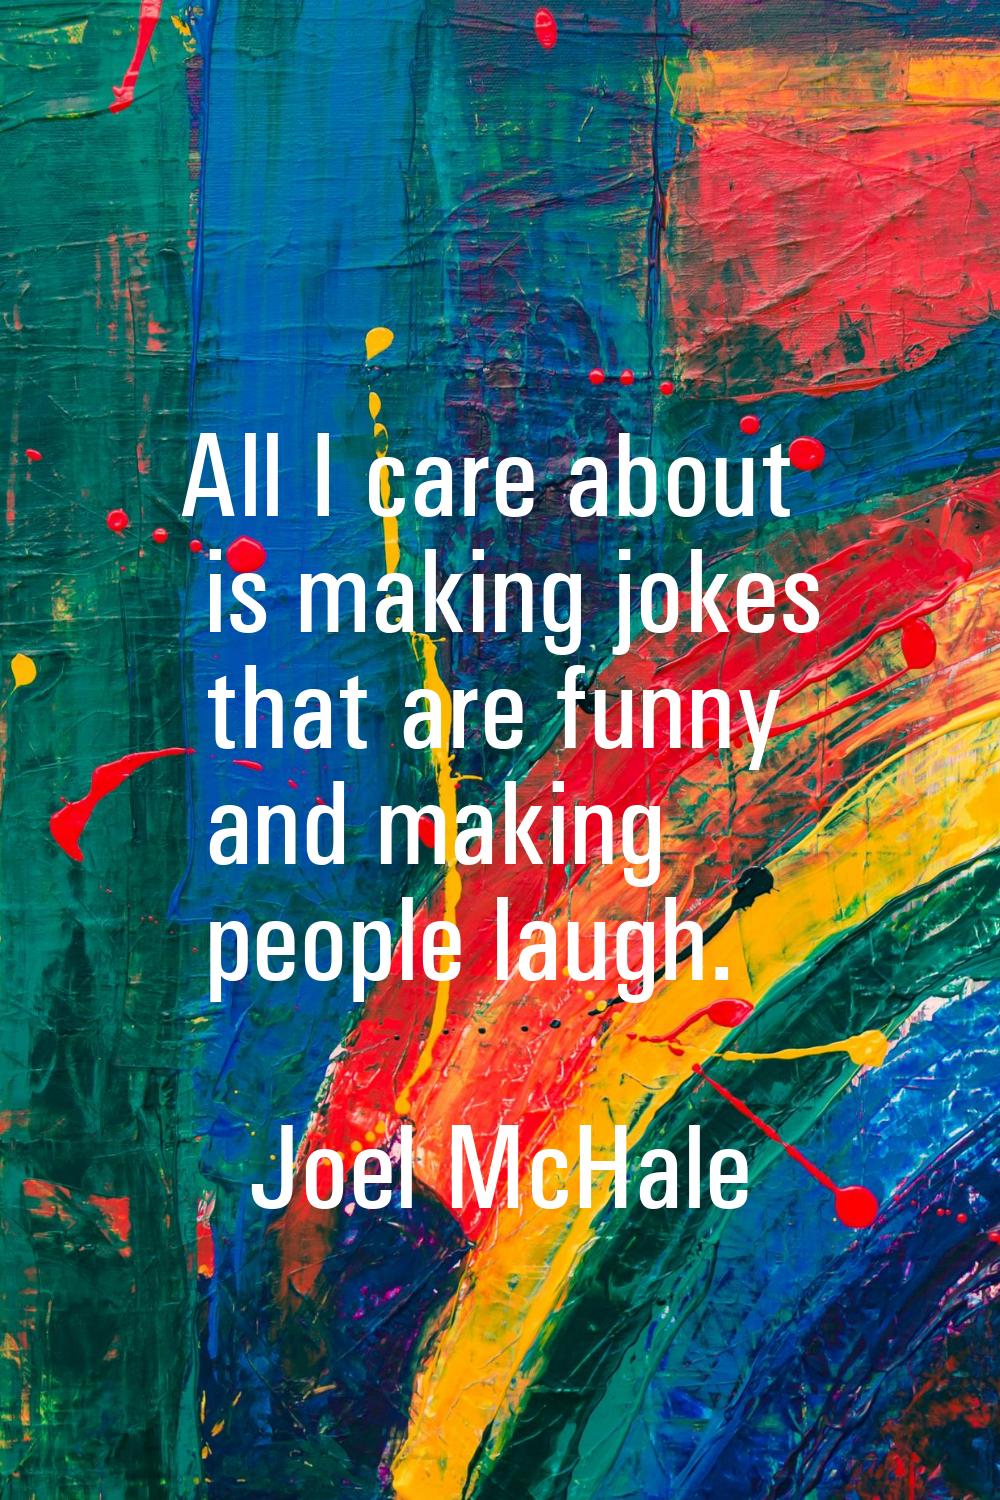 All I care about is making jokes that are funny and making people laugh.